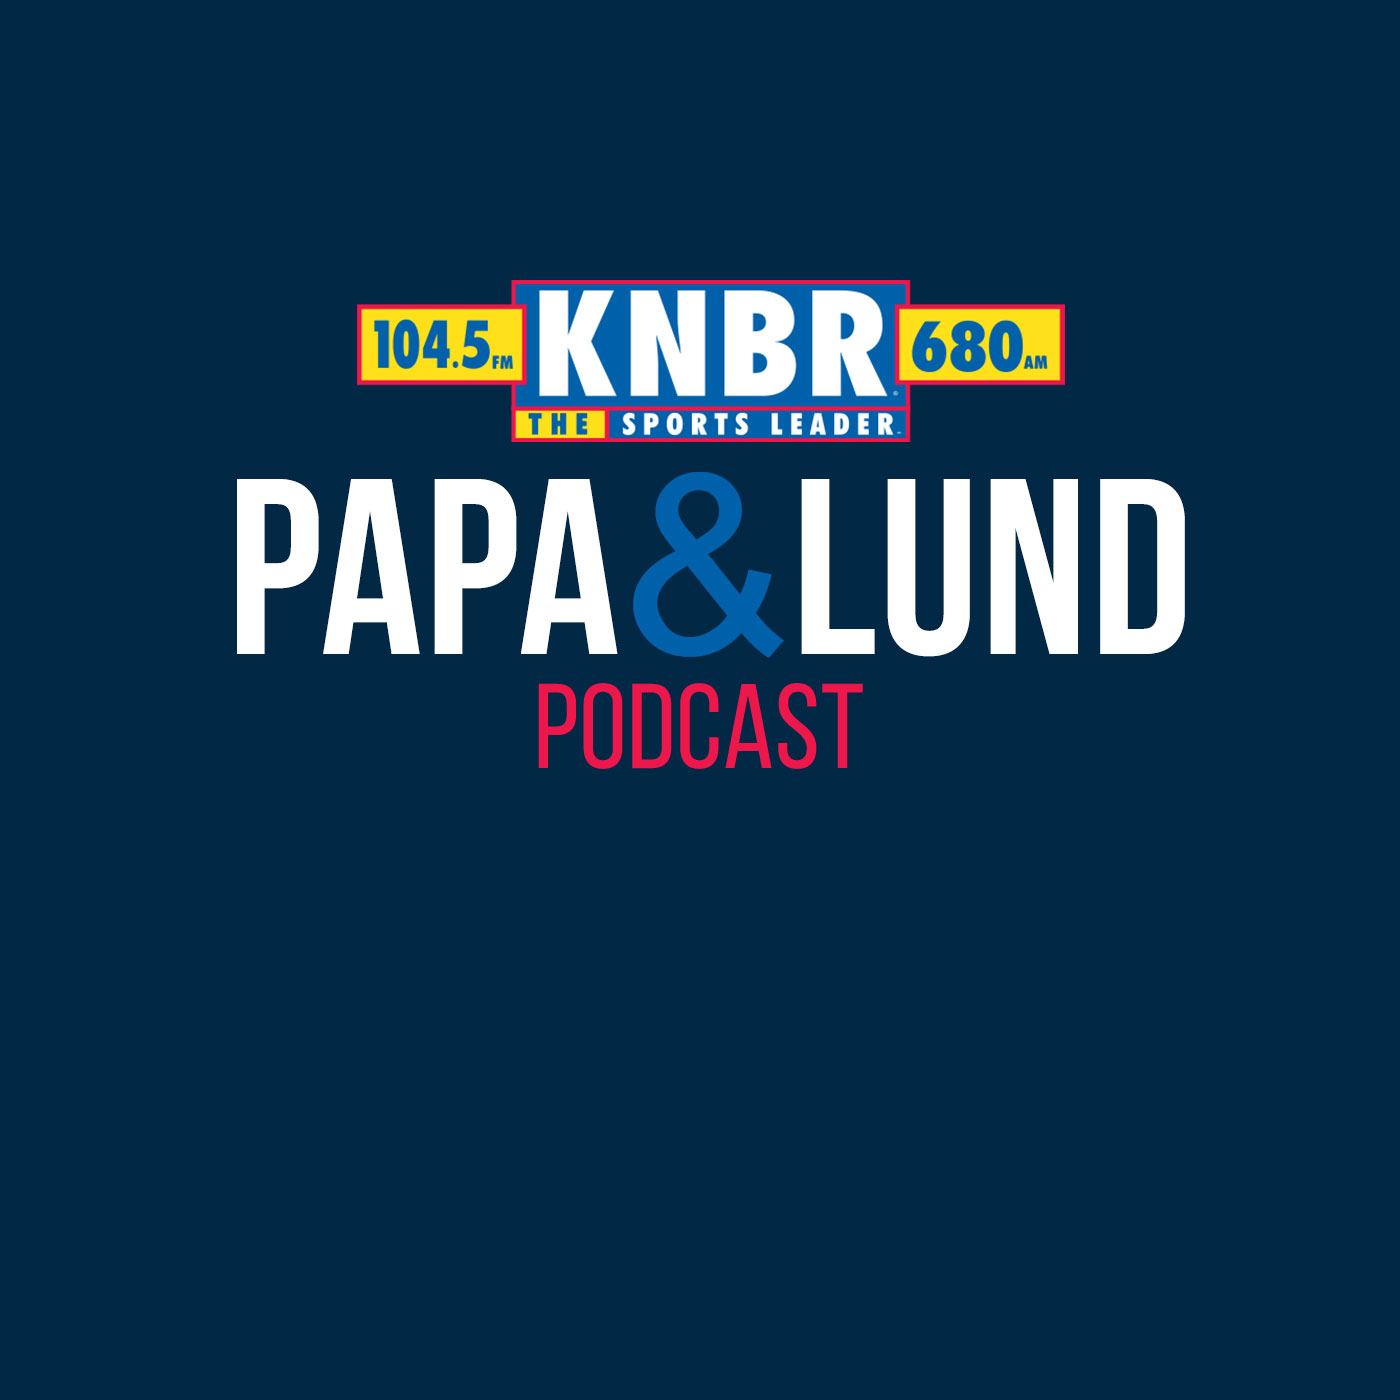 6-15 Shawn Estes chats with Papa & Lund and they try to figure out how the Arizona Diamondbacks are so bad